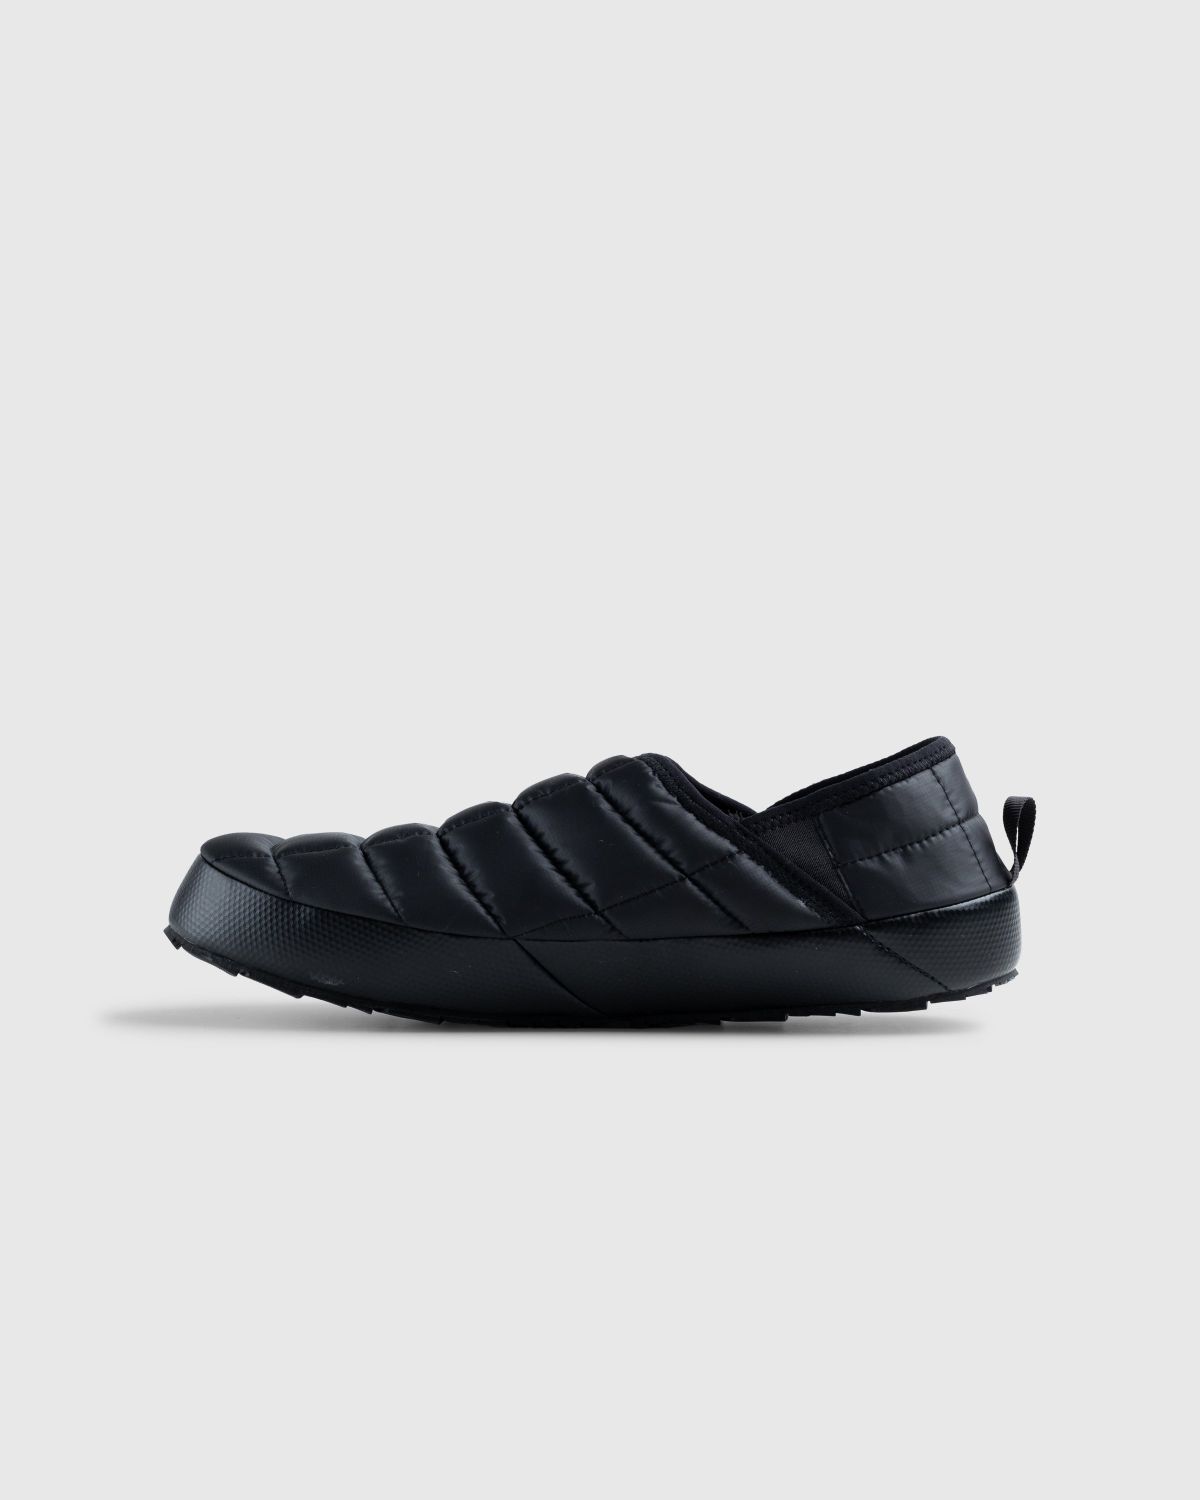 The North Face – ThermoBall Traction Mules V TNF Black/White - Sandals & Slides - Black - Image 2